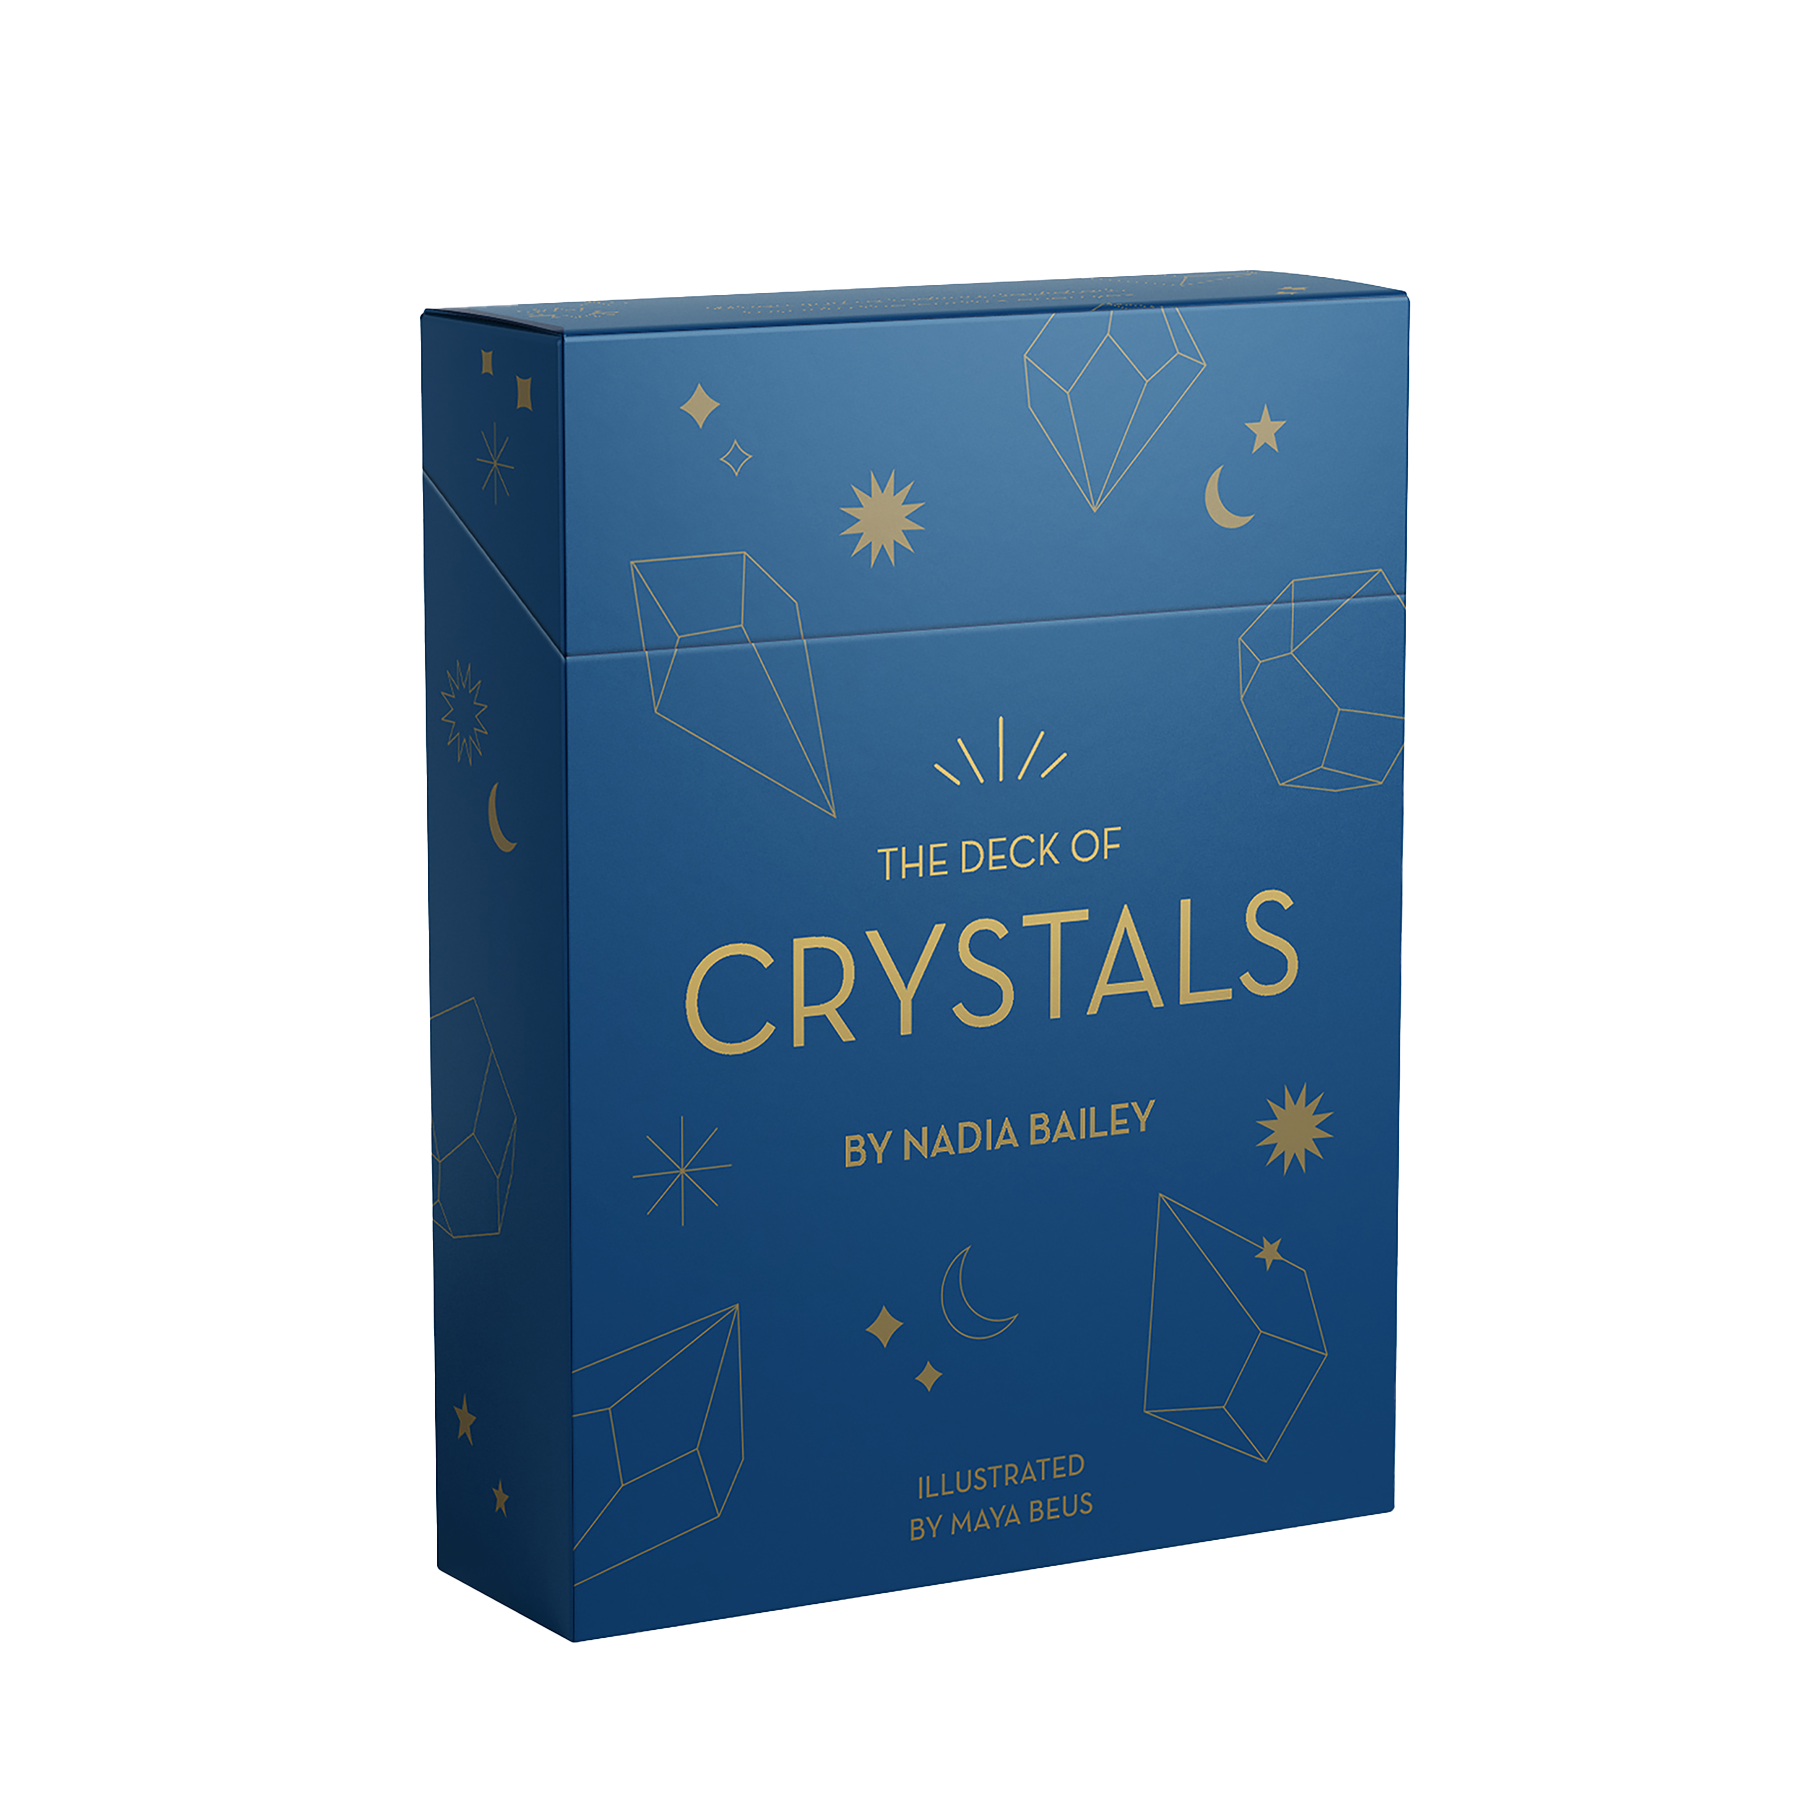 The Deck of Crystals